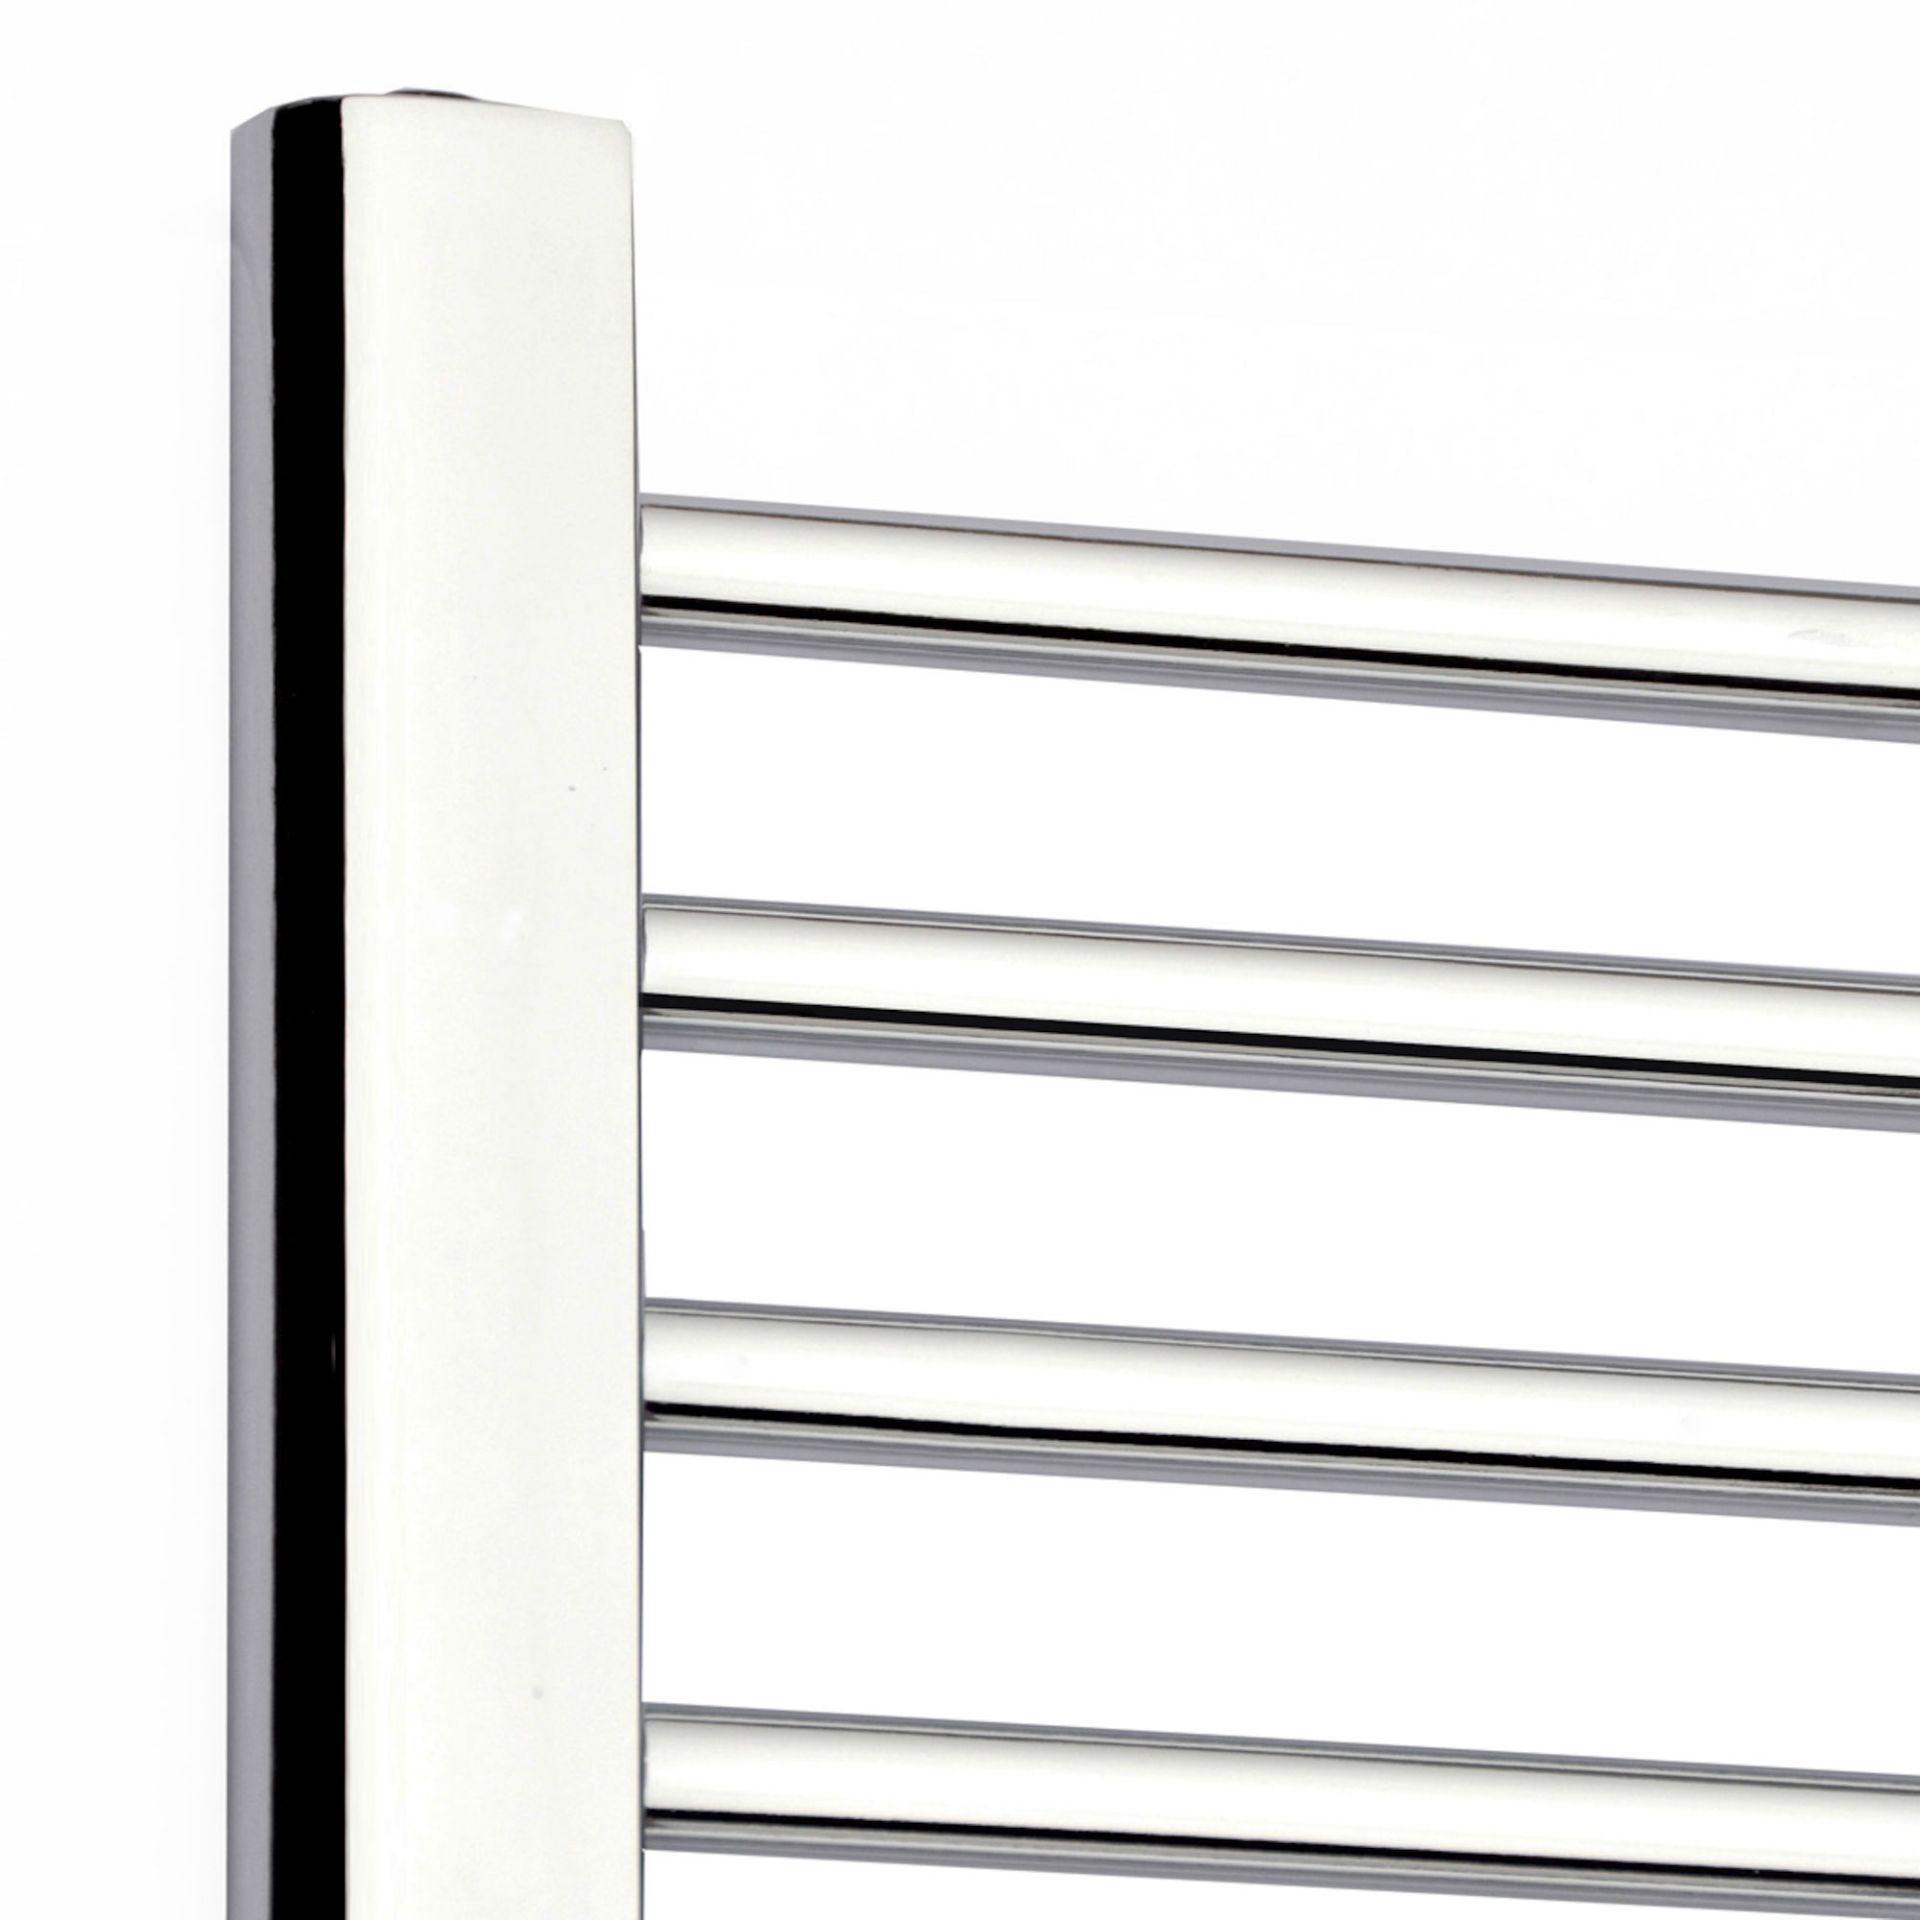 (EY11) 650x400mm Straight Heated Towel Radiator. Low carbon steel chrome plated radiator. This - Image 2 of 3